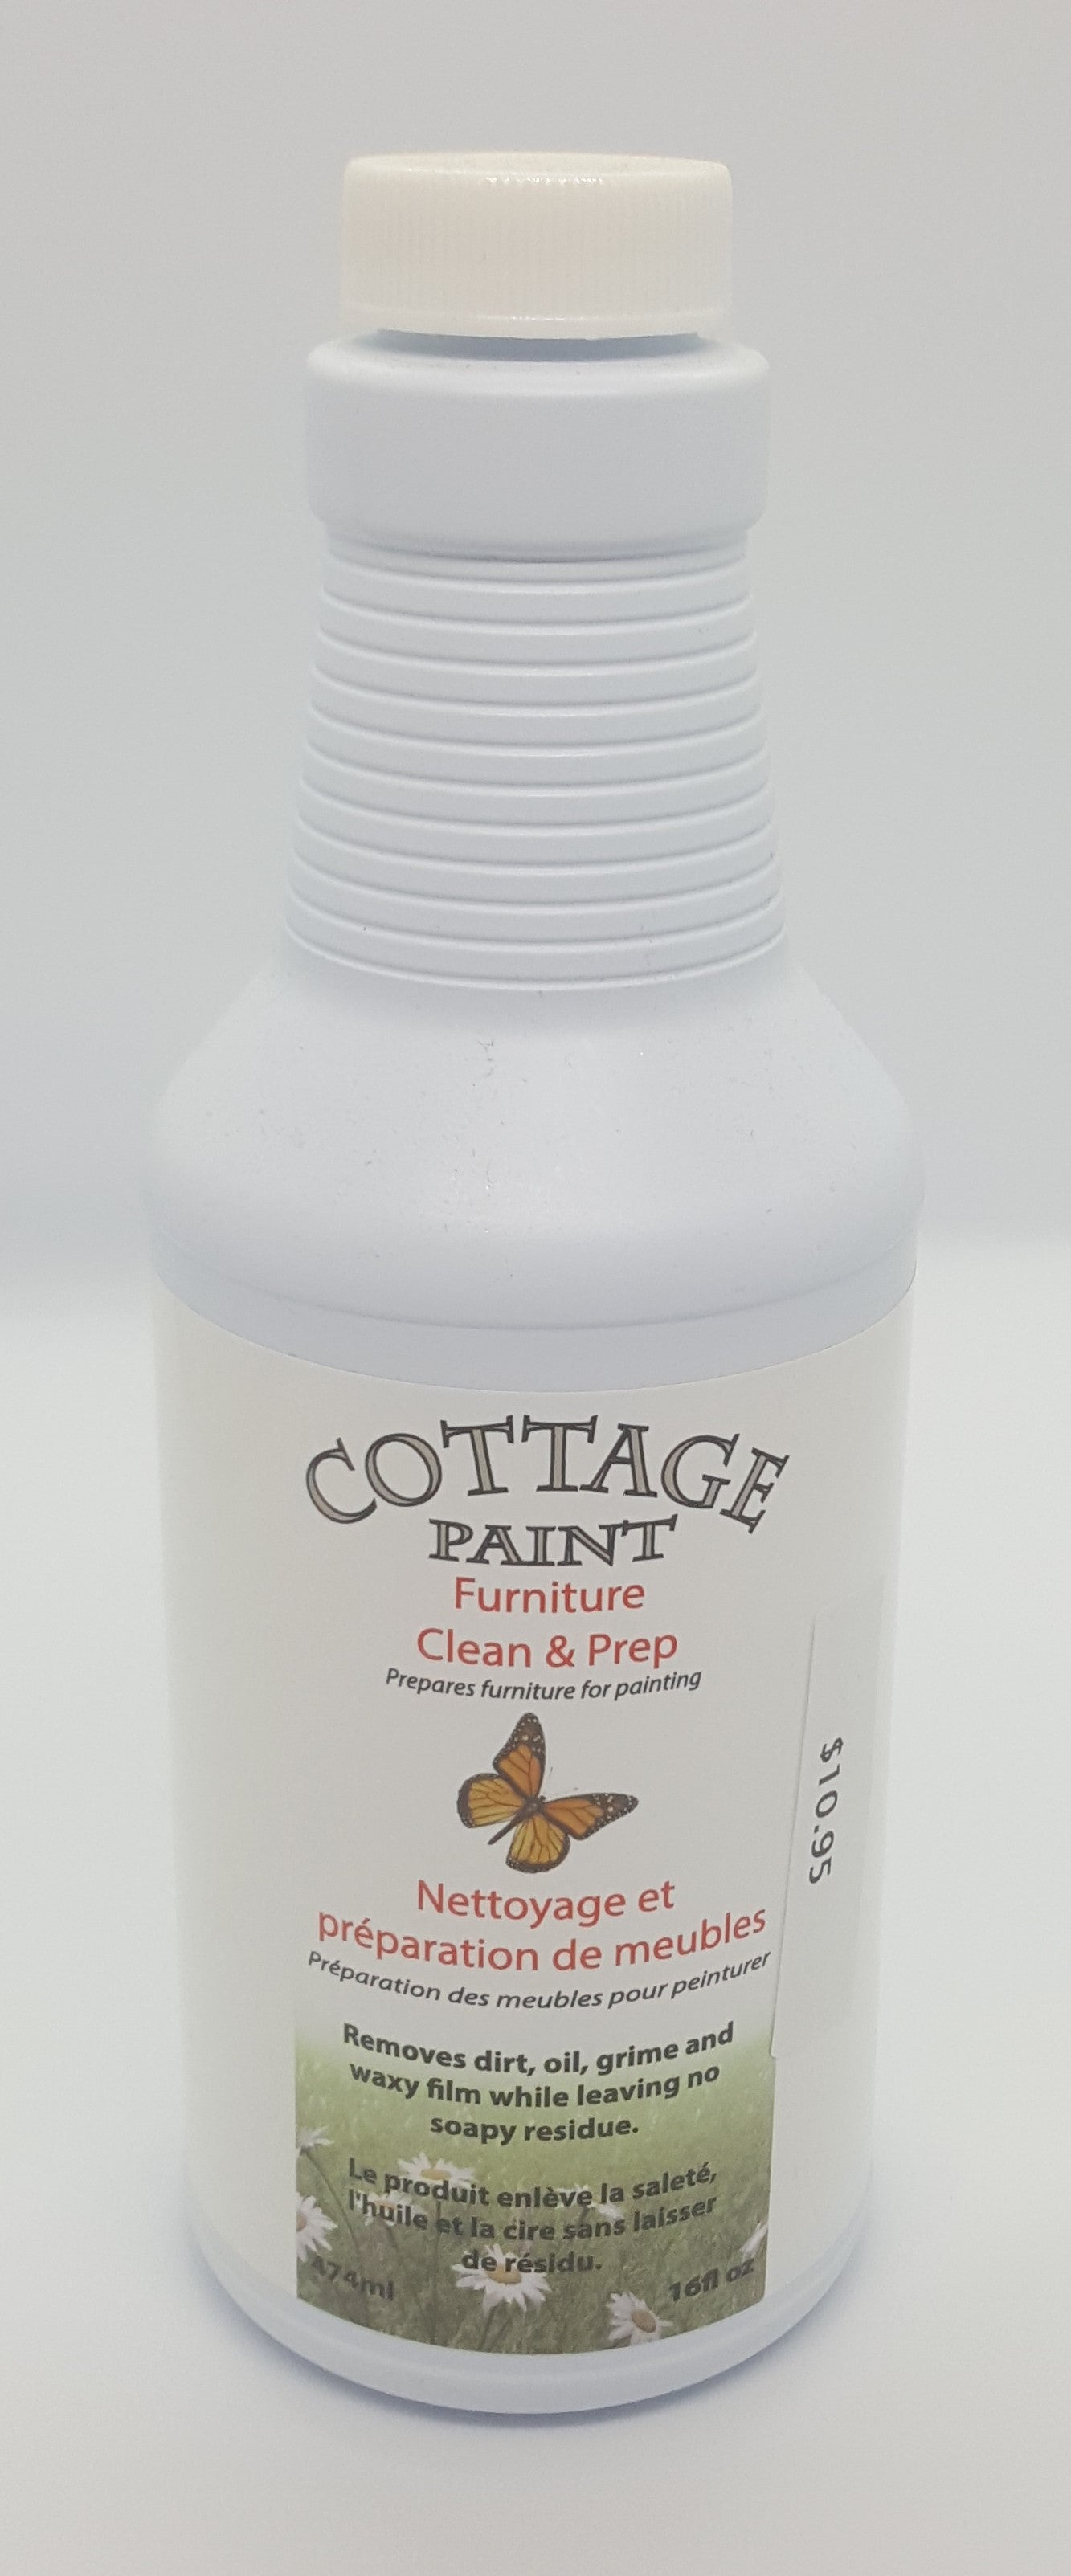 Cottage Paint Furniture Cleaner & Prep